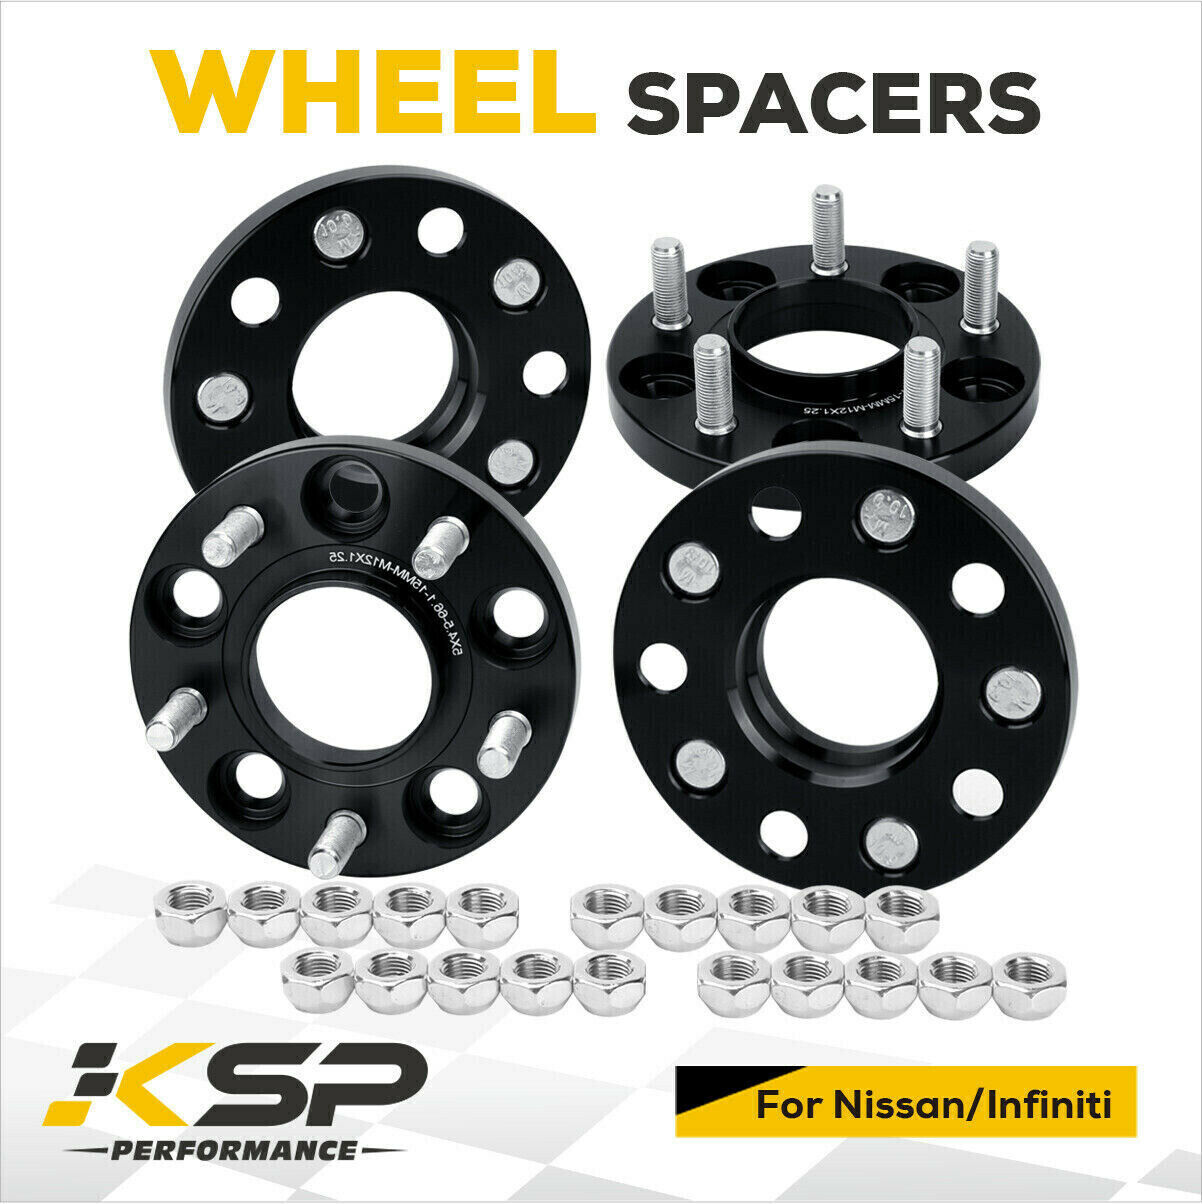 4X 15mm 5x4.5 to 5x114.3 Wheel Spacer Adapters Fits Nissan 350Z Infiniti G35 G37